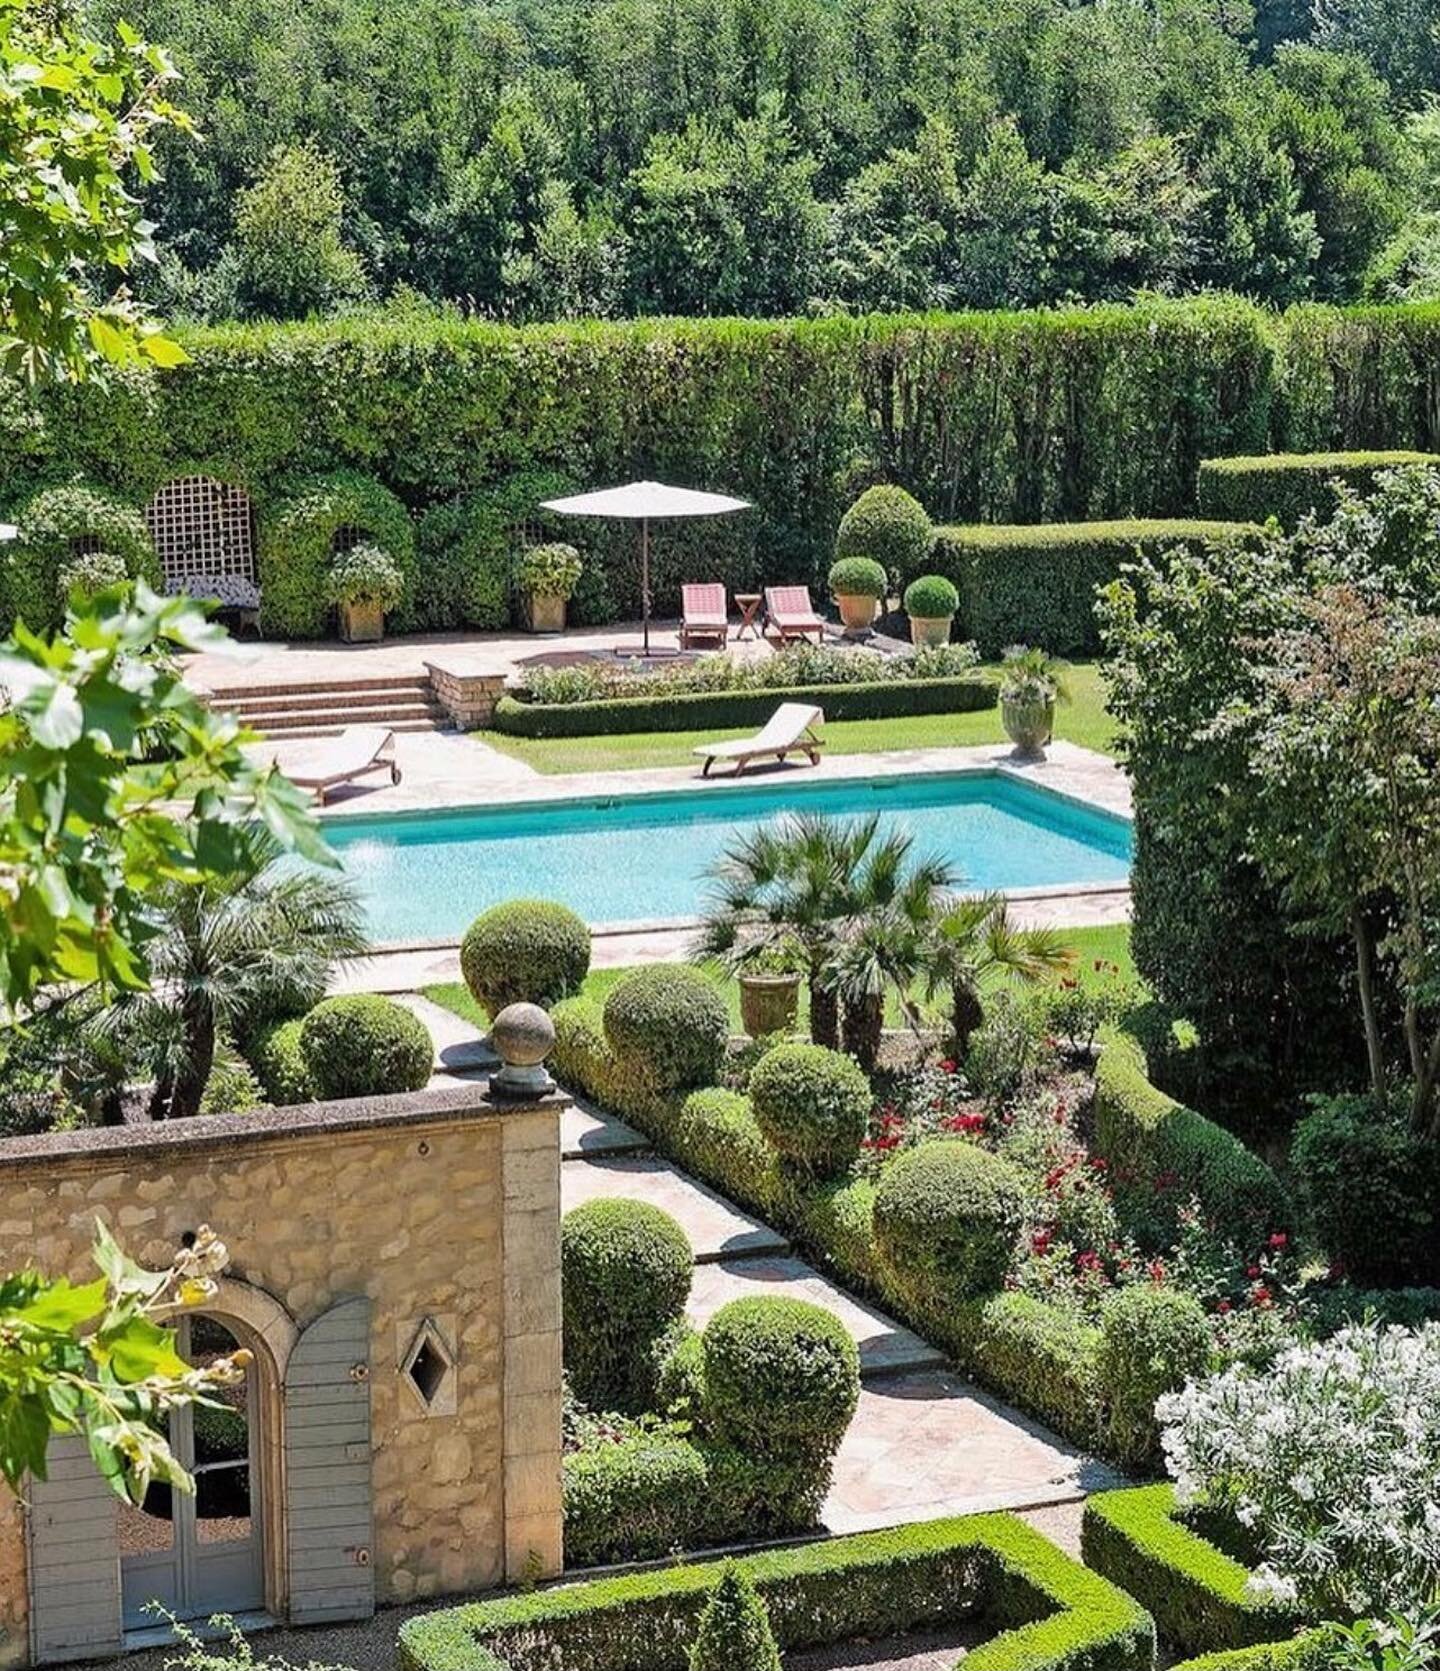 lovely gardens at Chateau Mireille in Saint-Rémy-de-Provence 
.
.
.
.
.
.
.
.
#chateaumireille #saintremydeprovence #provence #southoffrance #pool #swimmingpool #garden #landscape #pooldesign #gardendesign #topiary #landscapearchitecture #kellybehun